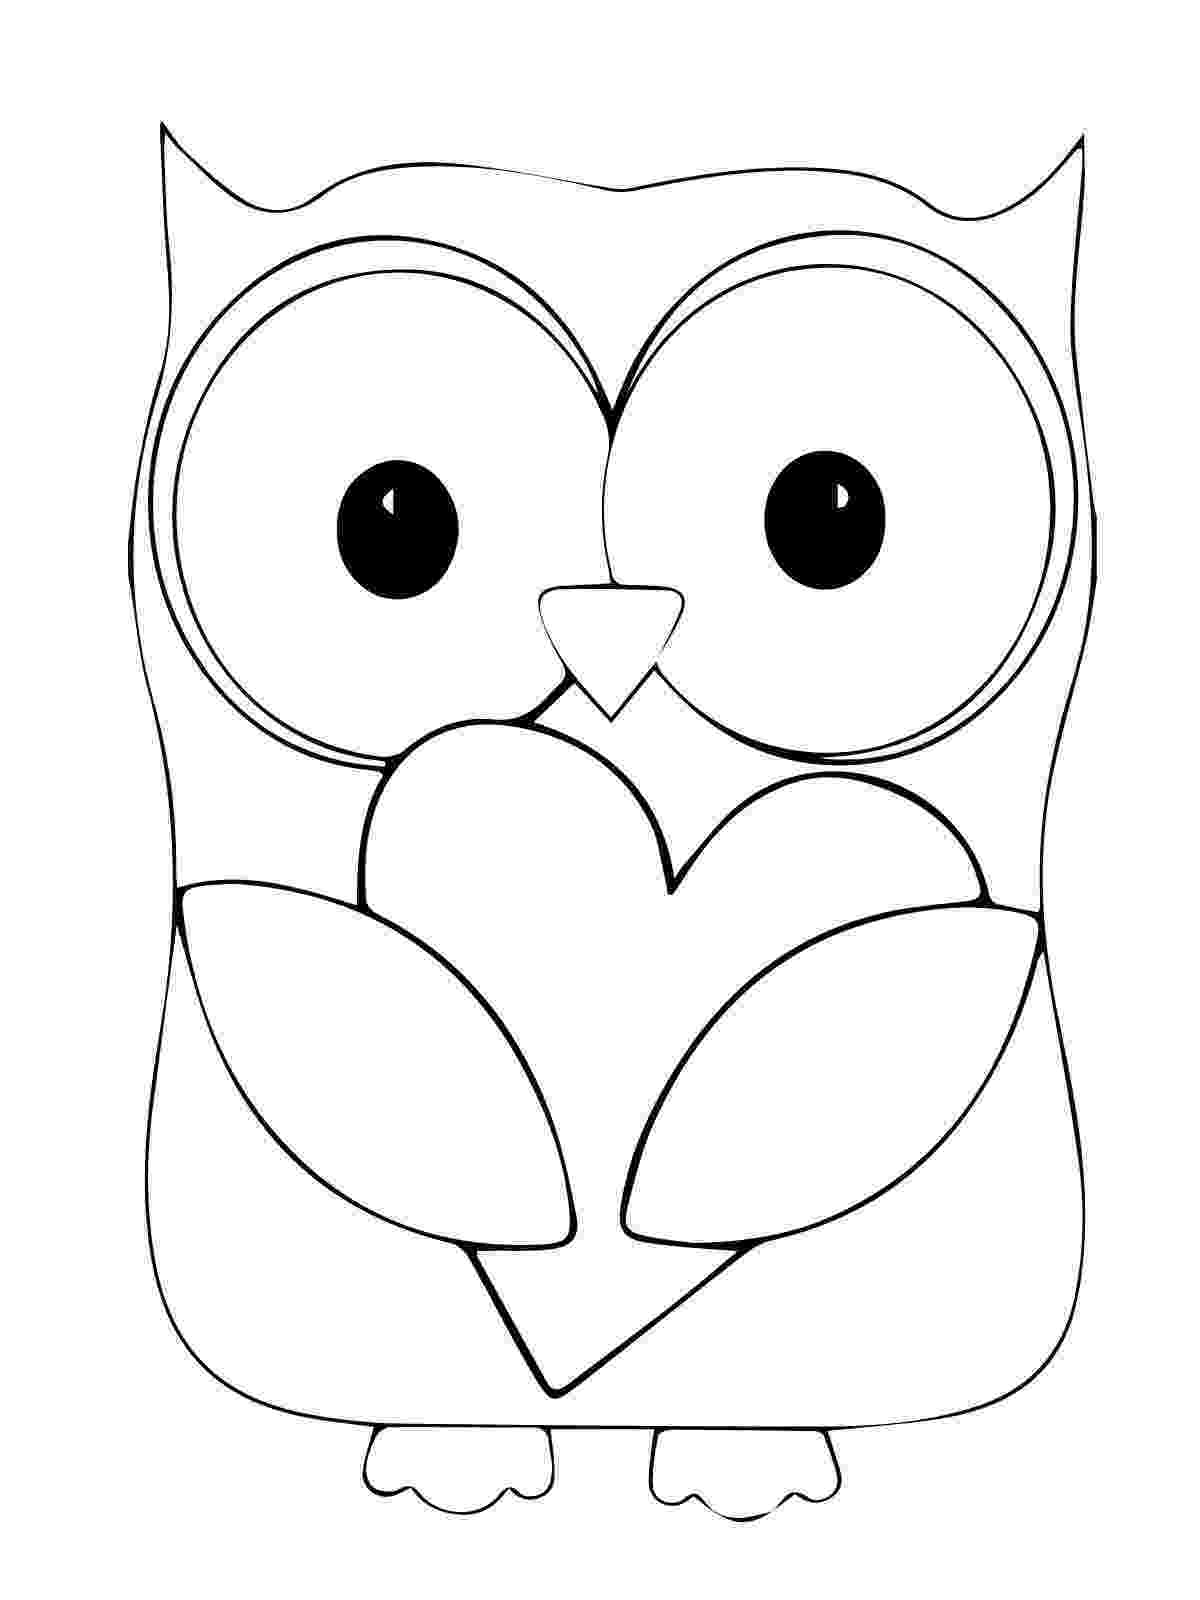 pics of owls to color baby owls coloring sheet to print owls pics to color of 